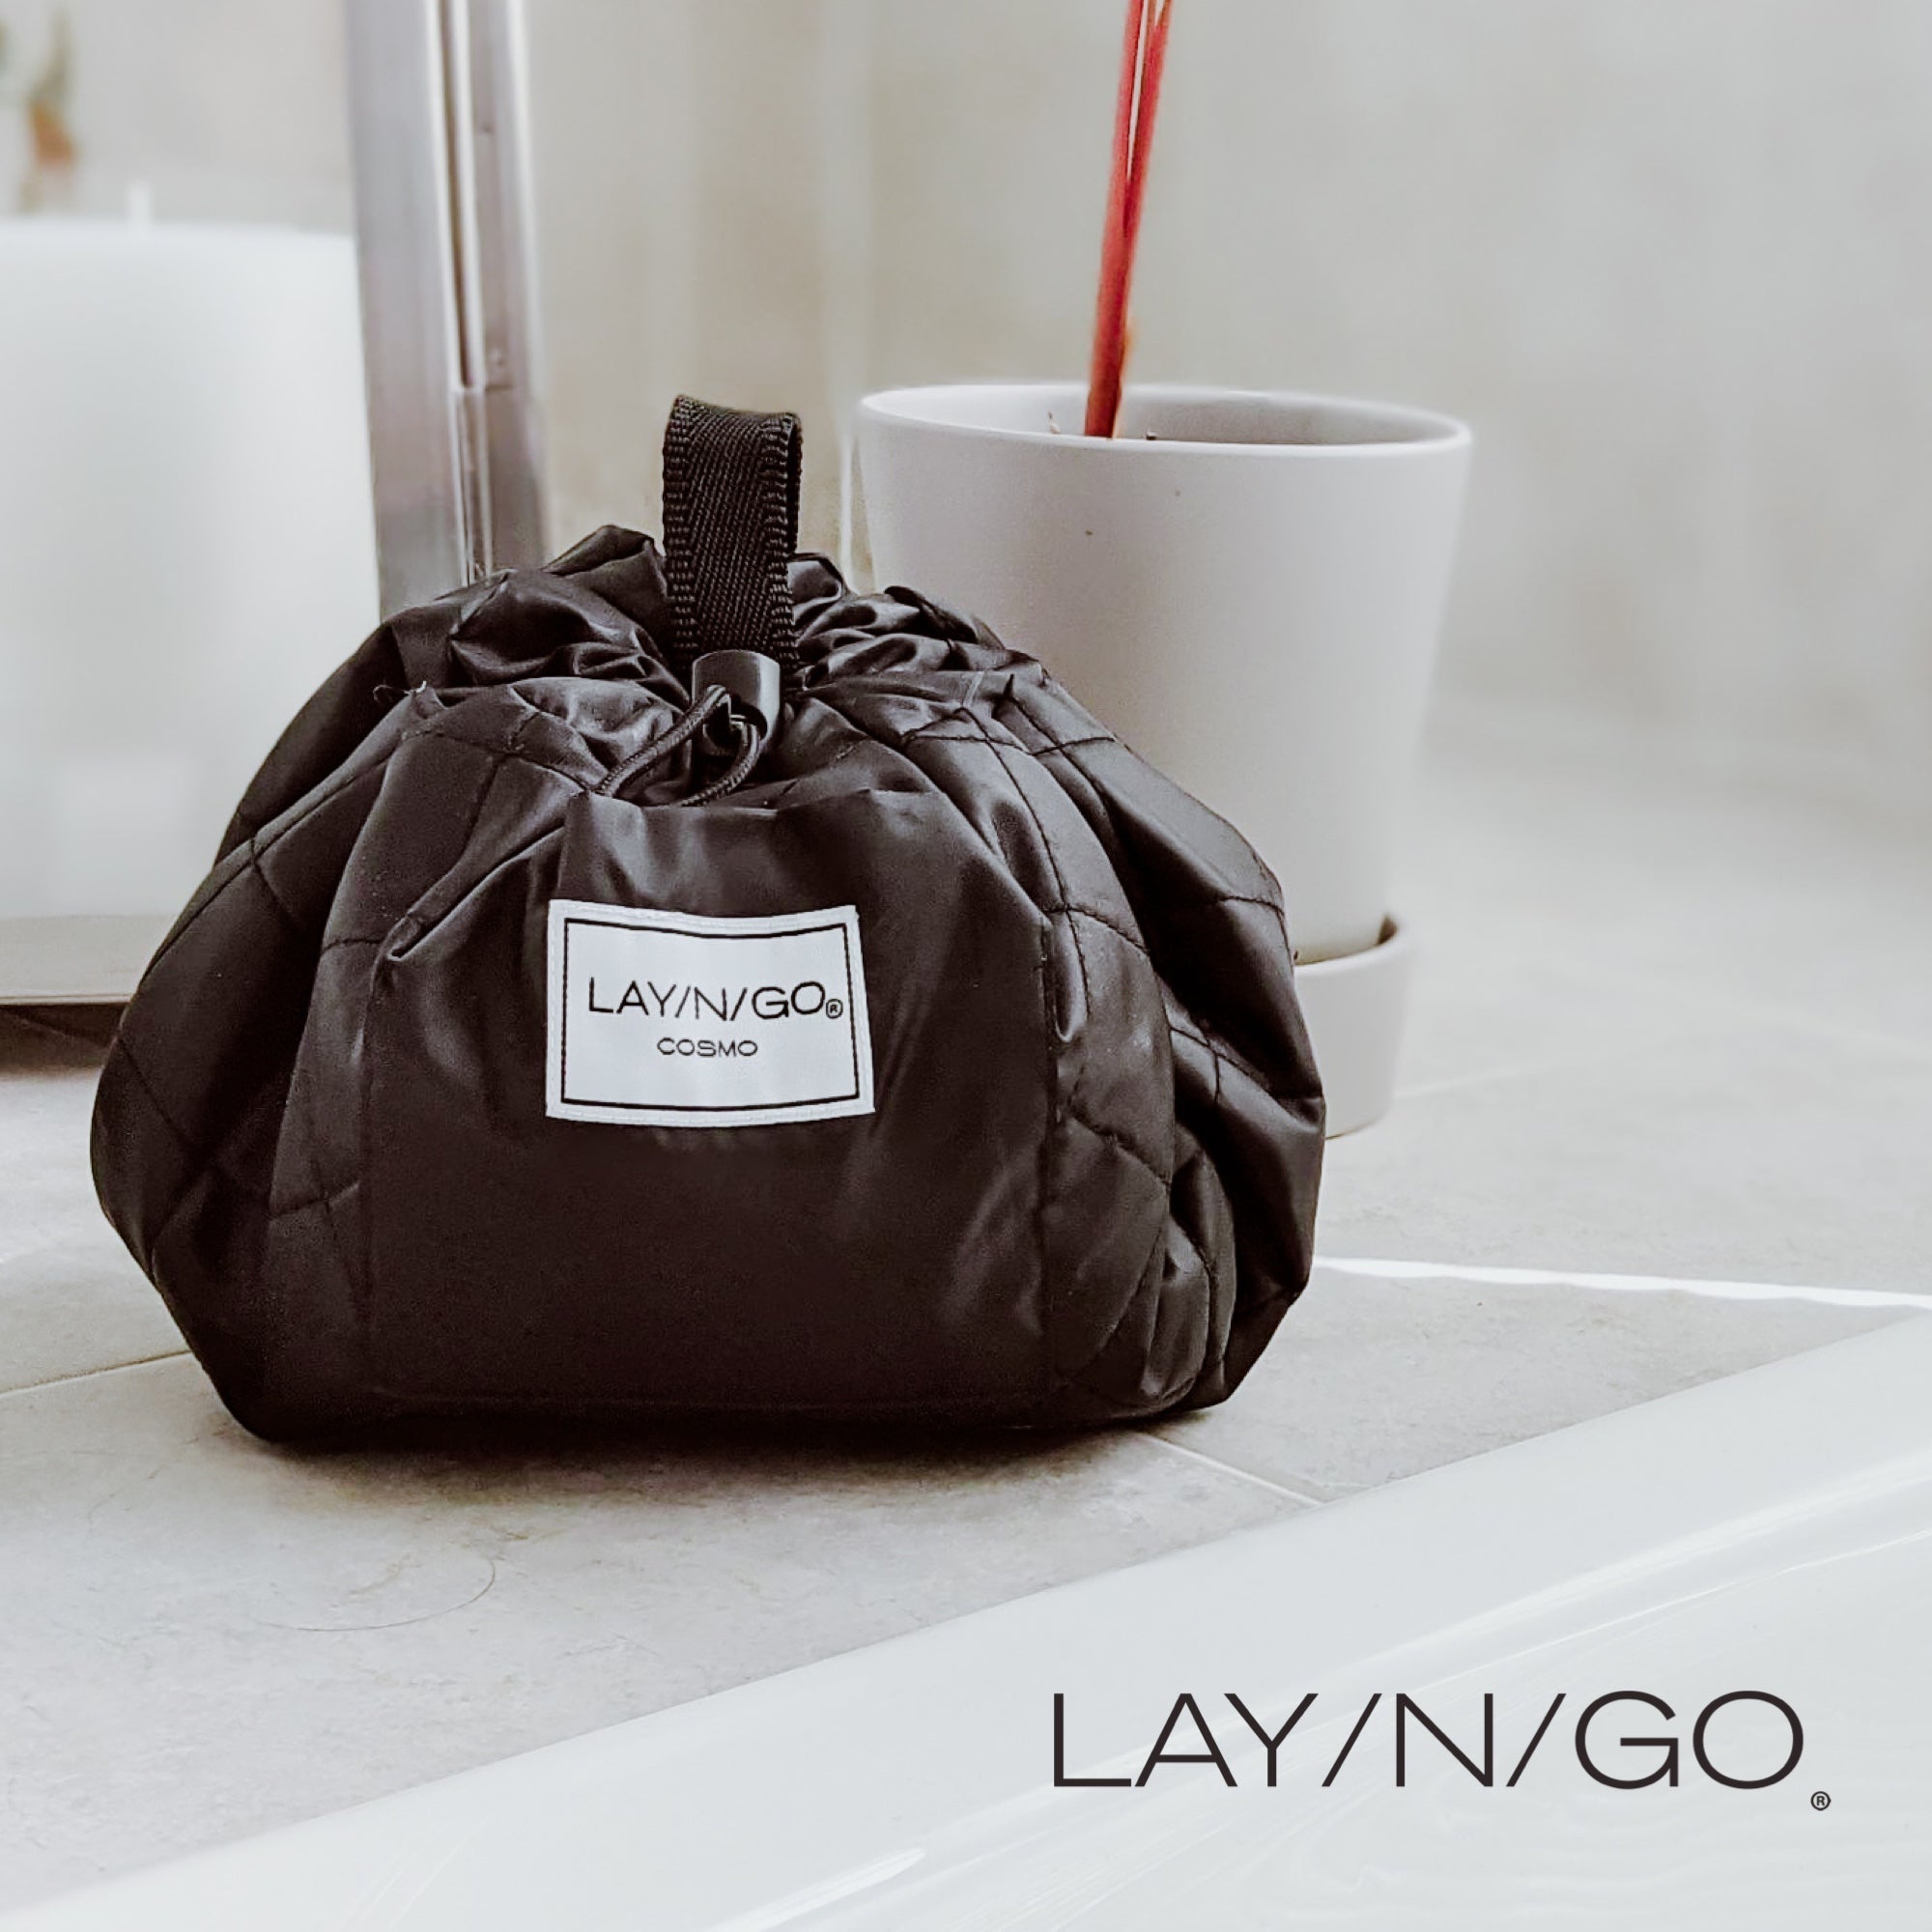 Lay/N/Go COSMO Bag 16 inch